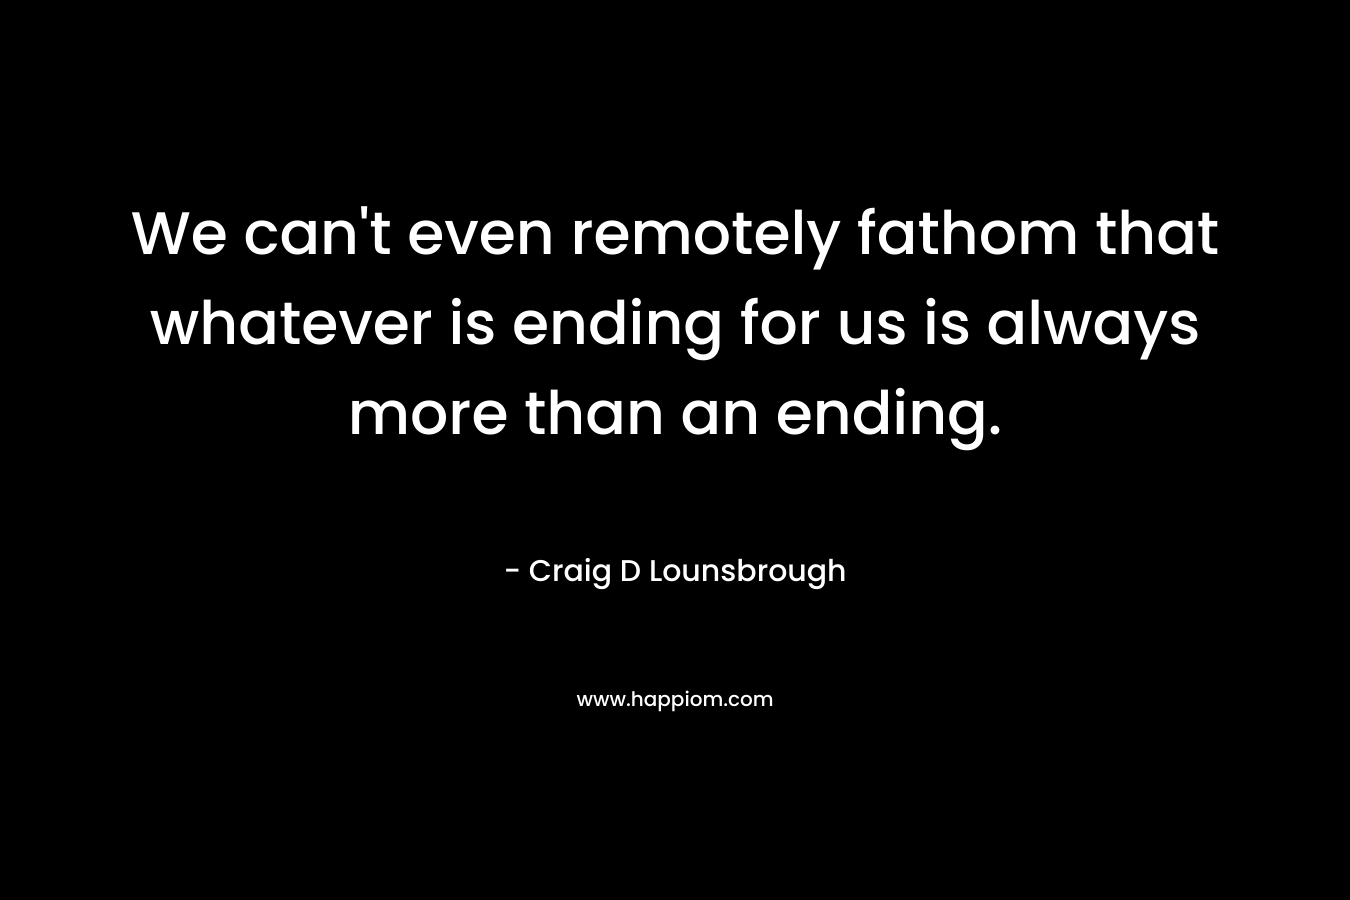 We can't even remotely fathom that whatever is ending for us is always more than an ending.